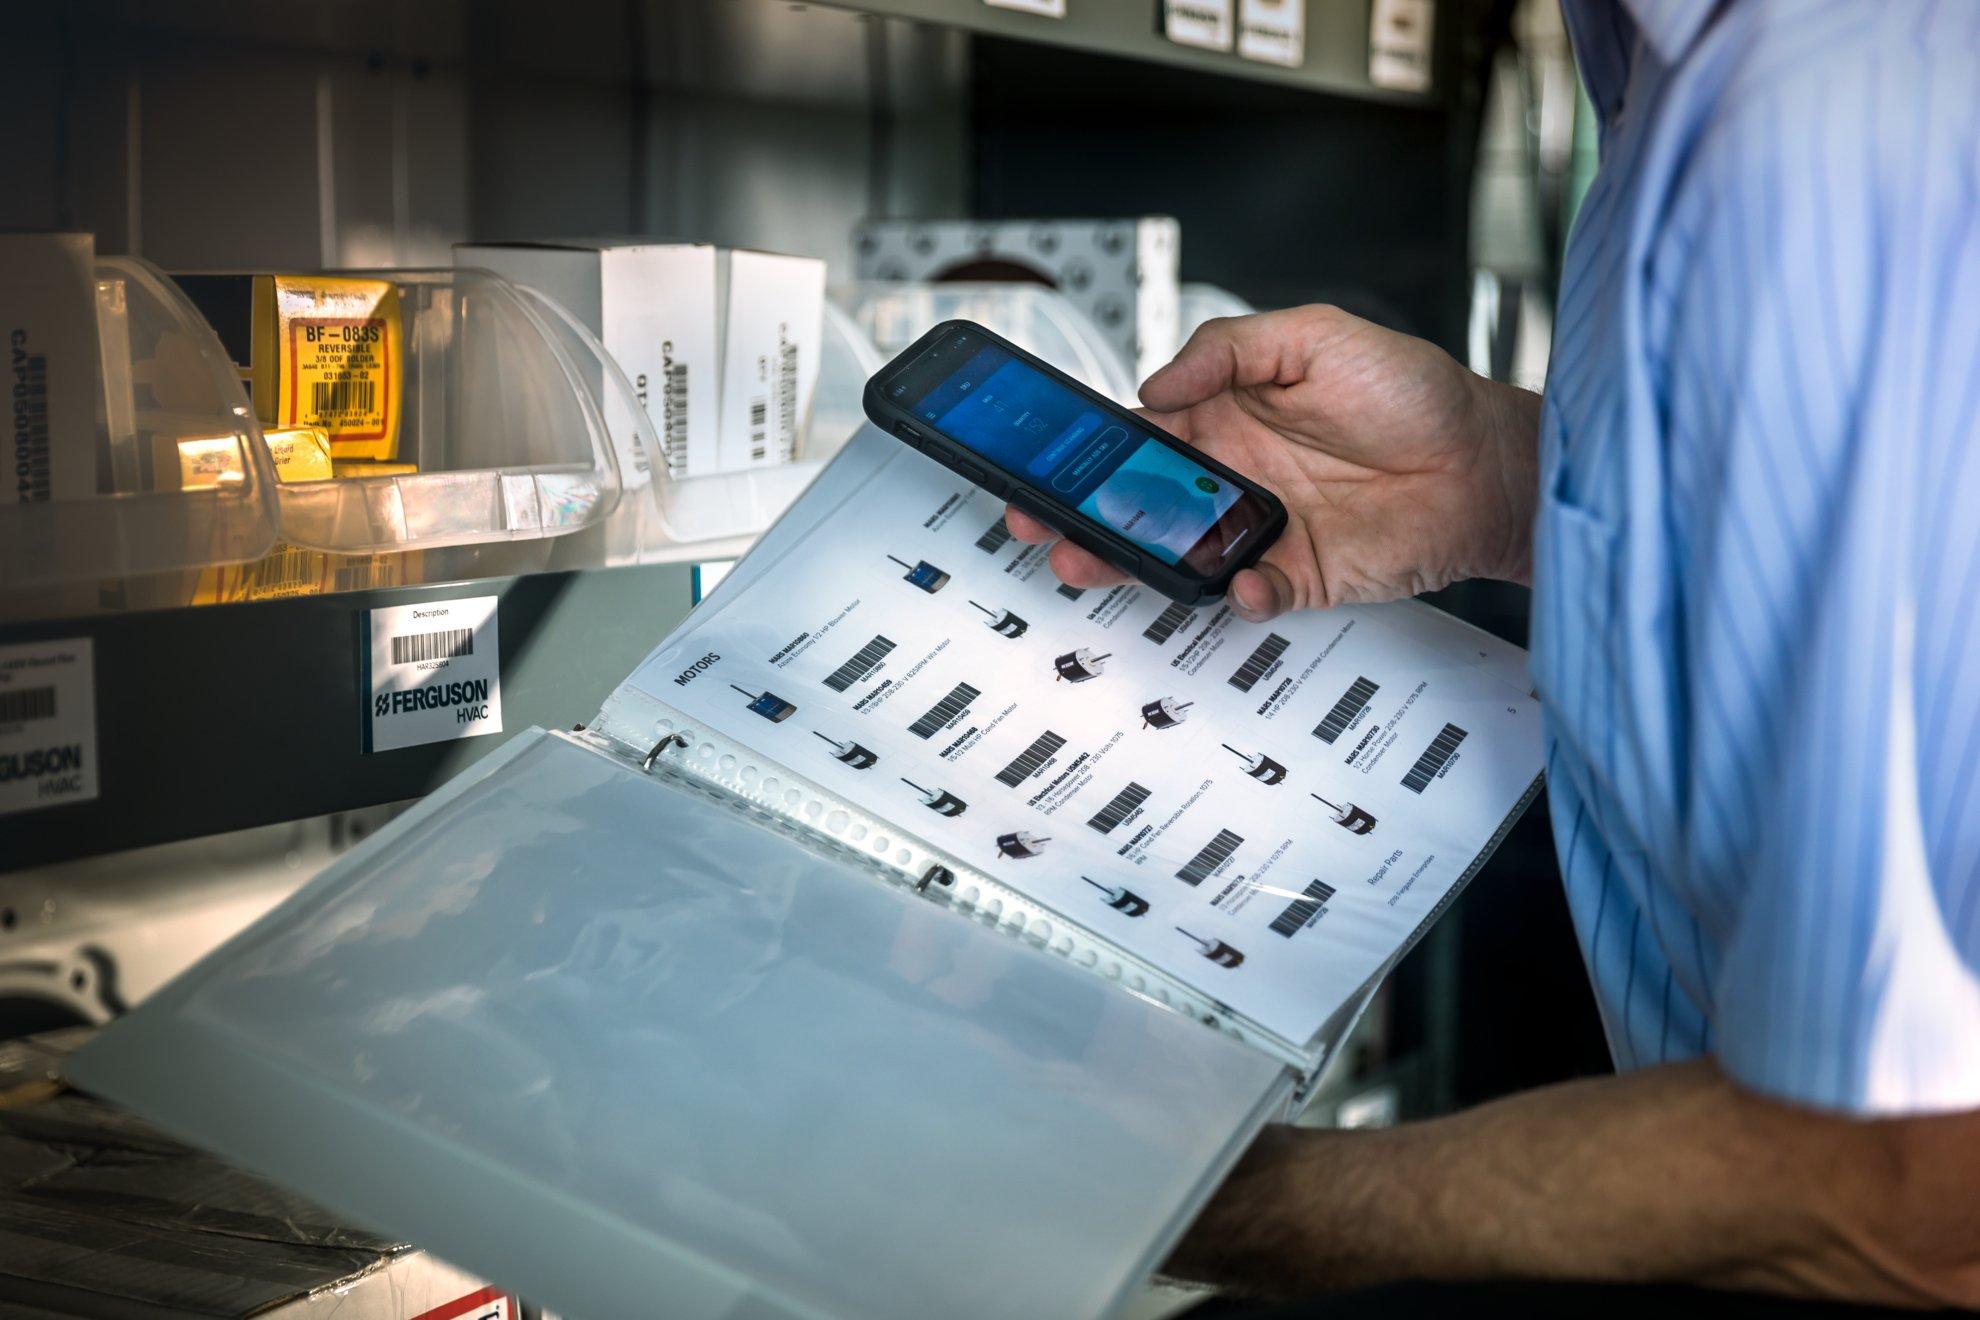 An HVAC technician uses his phone to scan barcodes of parts in a price book.